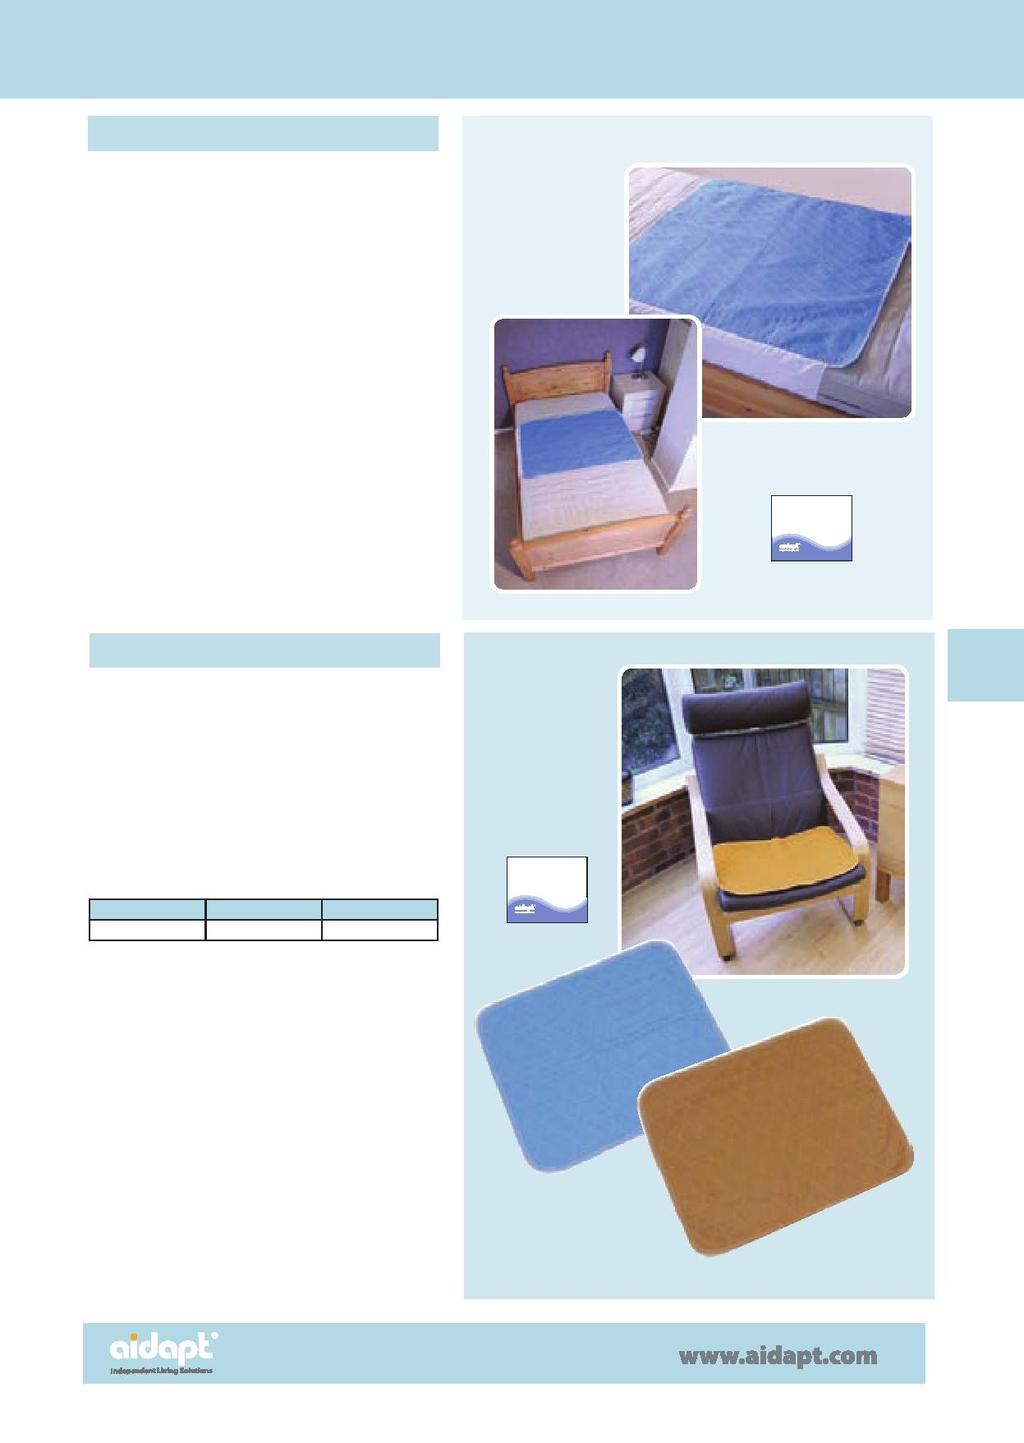 Incontinence Washable Bed Pad VM842B A more eco-friendly option than disposable bed pads Attached 'wings' fold around the mattress for a secure fit Soft, breathable top layer with a non-slip,